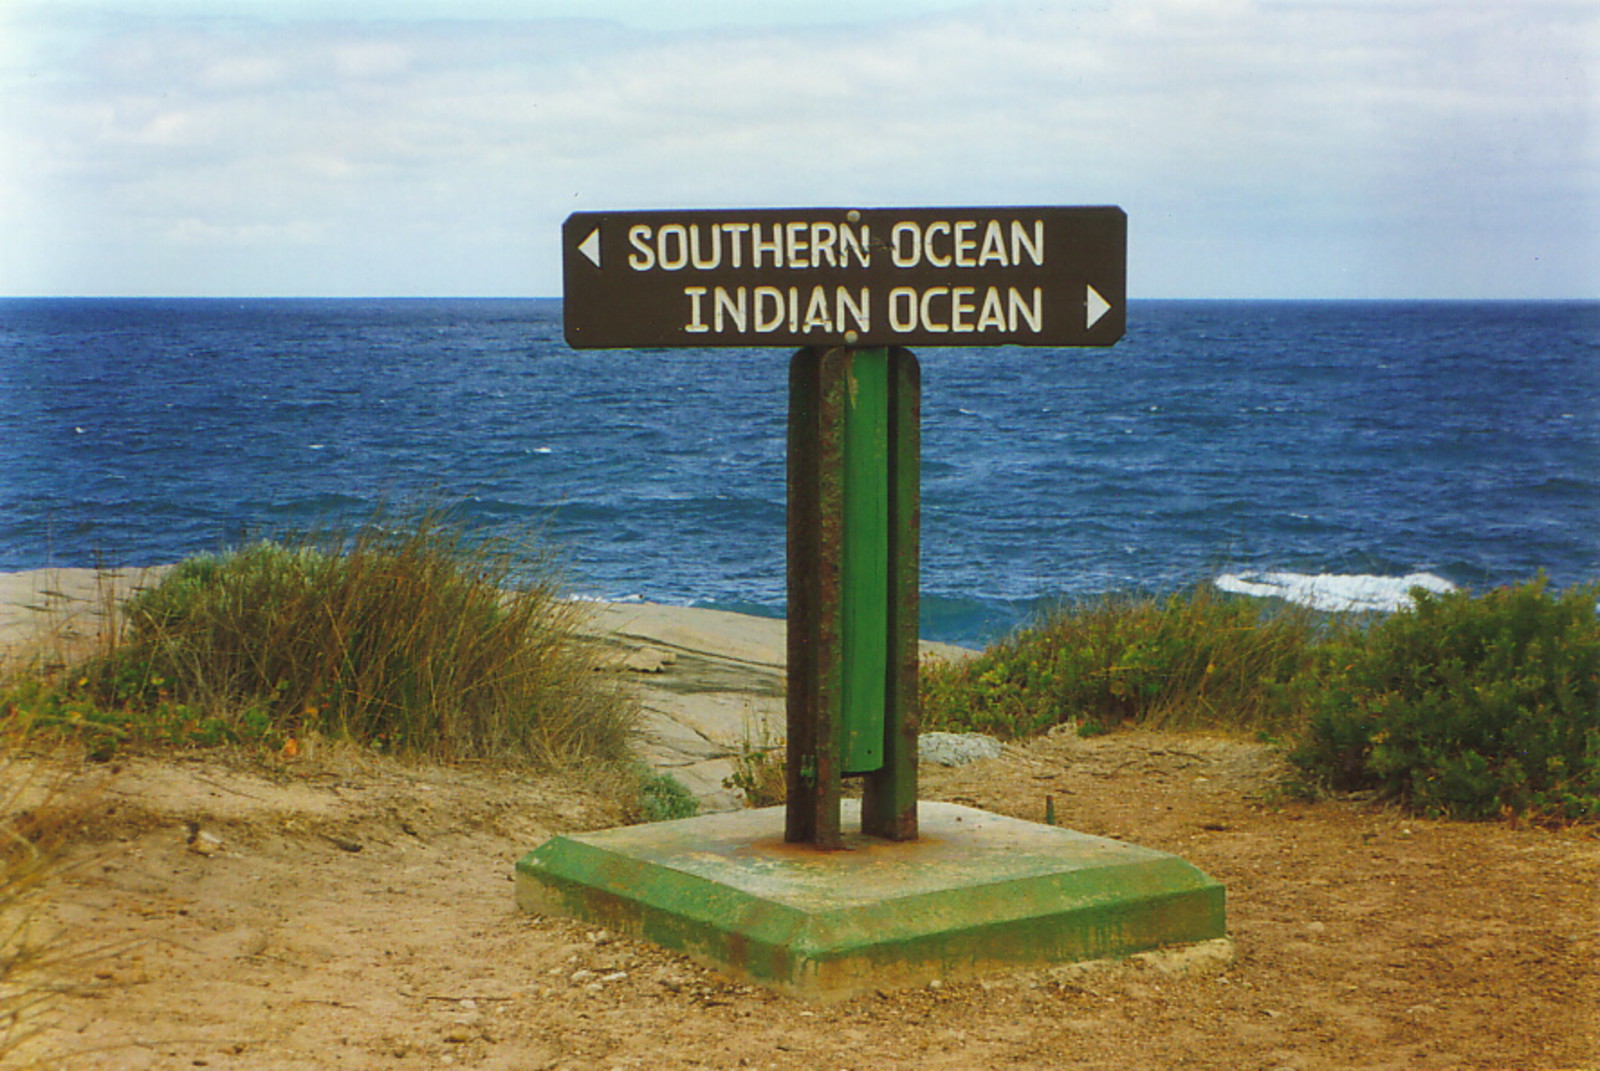 A sign at Cape Leeuwin pointing out the Southern and Indian Oceans